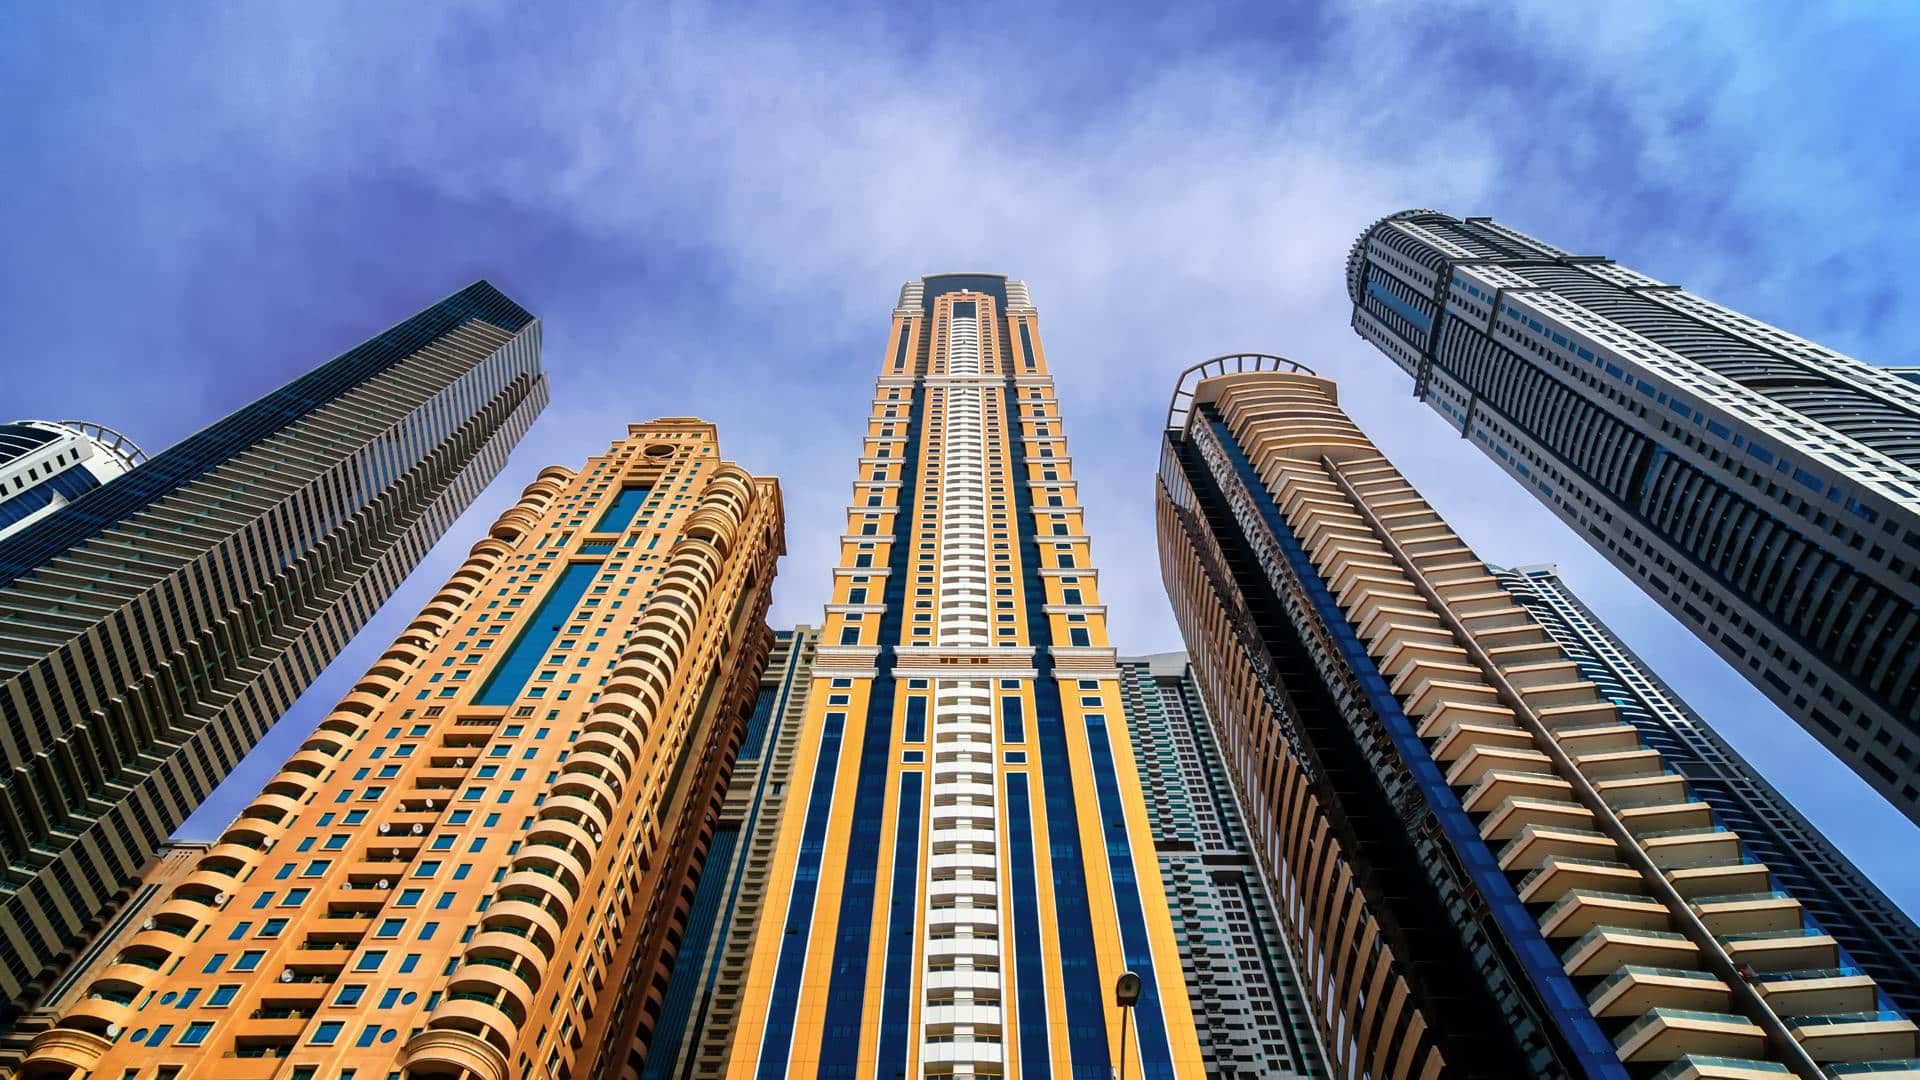 Dubai Residential Property Market: A Rising Trend in Capital Values